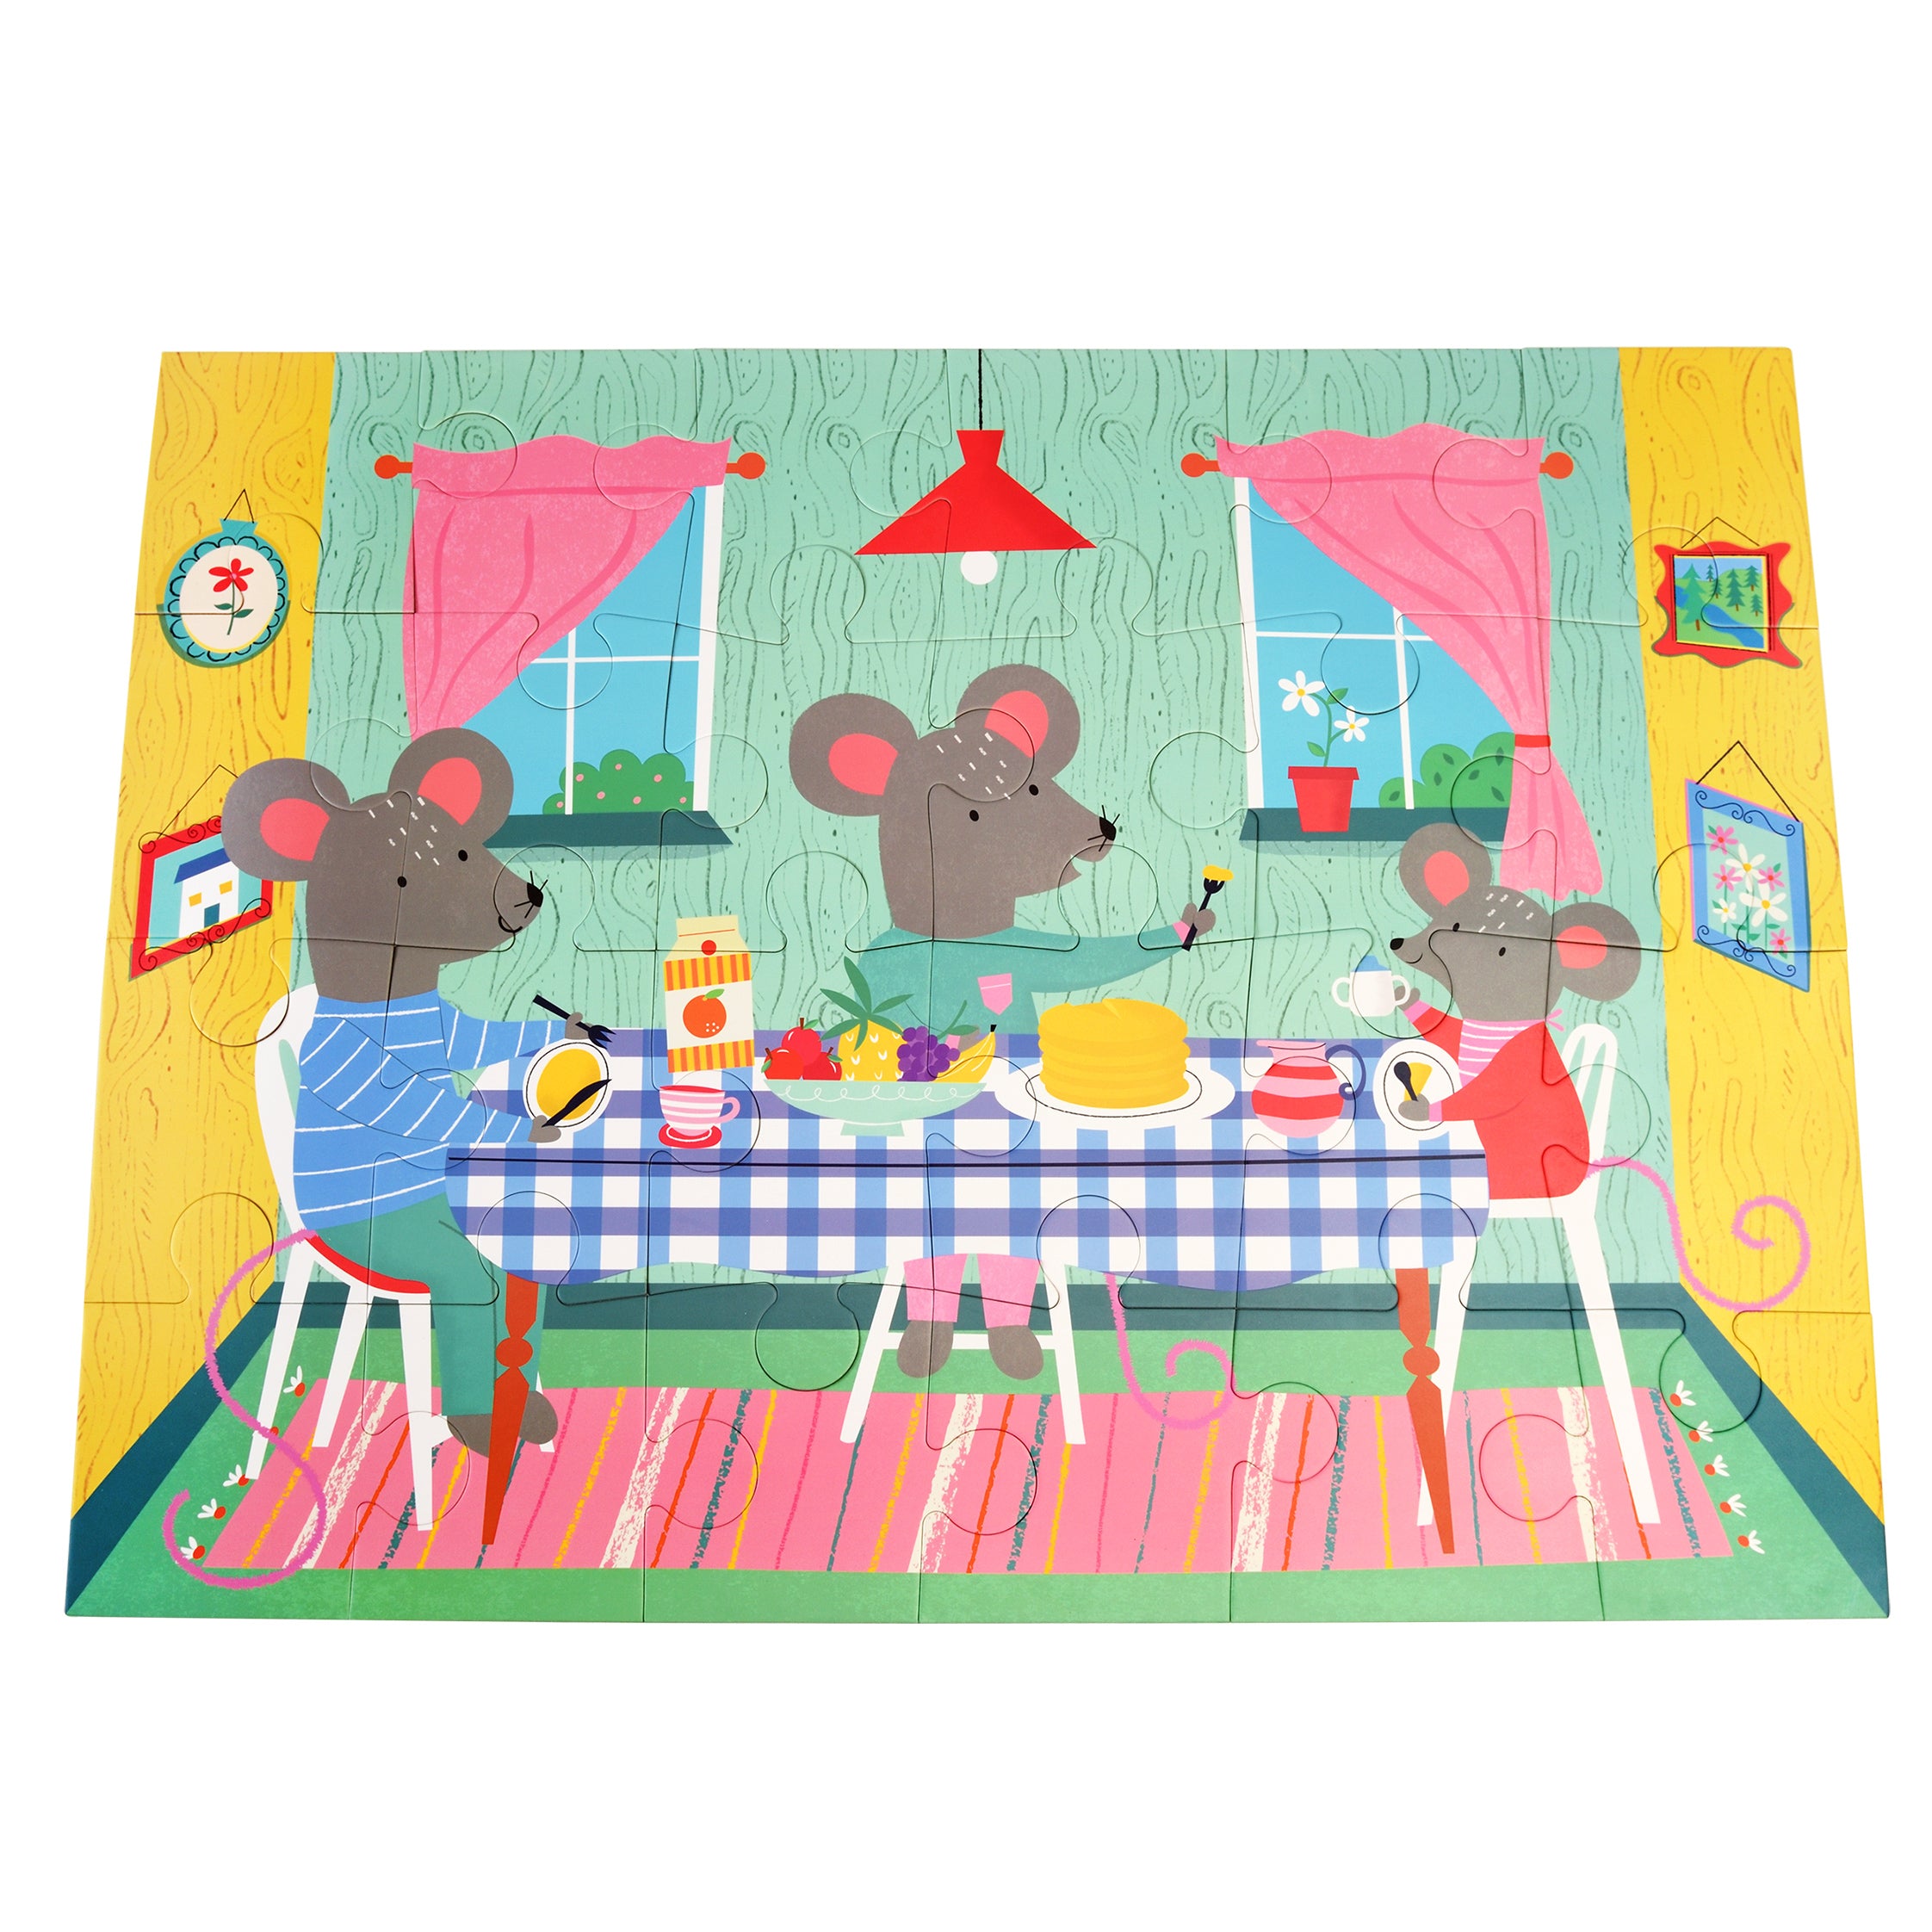 Mouse In A House 24pc  Floor Puzzle